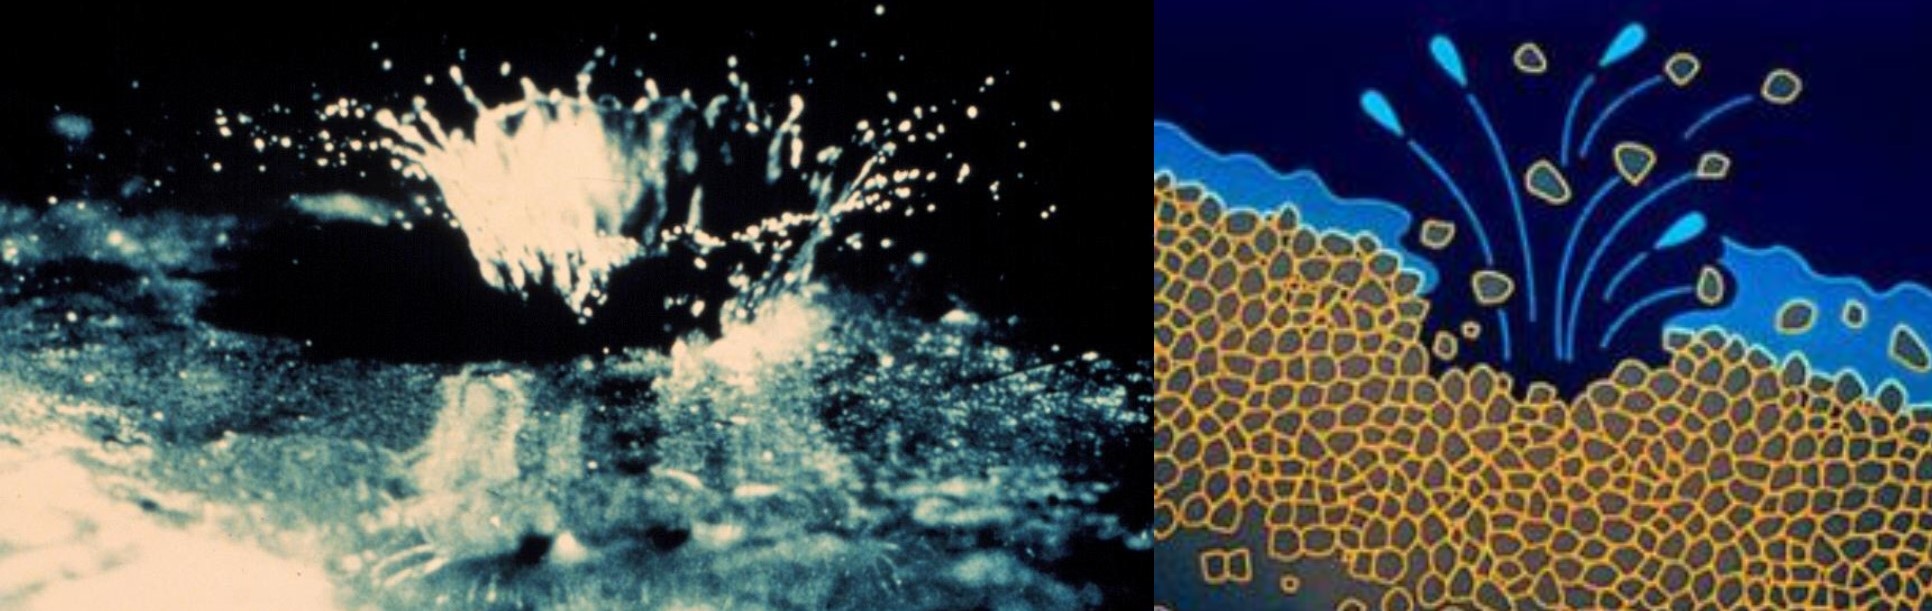 The image on the left is a closeup photo of a raindrop splashing onto soil and resulting in displacement of fine soil particles. The image on the right is a diagram showing a cross-section view of the rain drop soil erosion action.